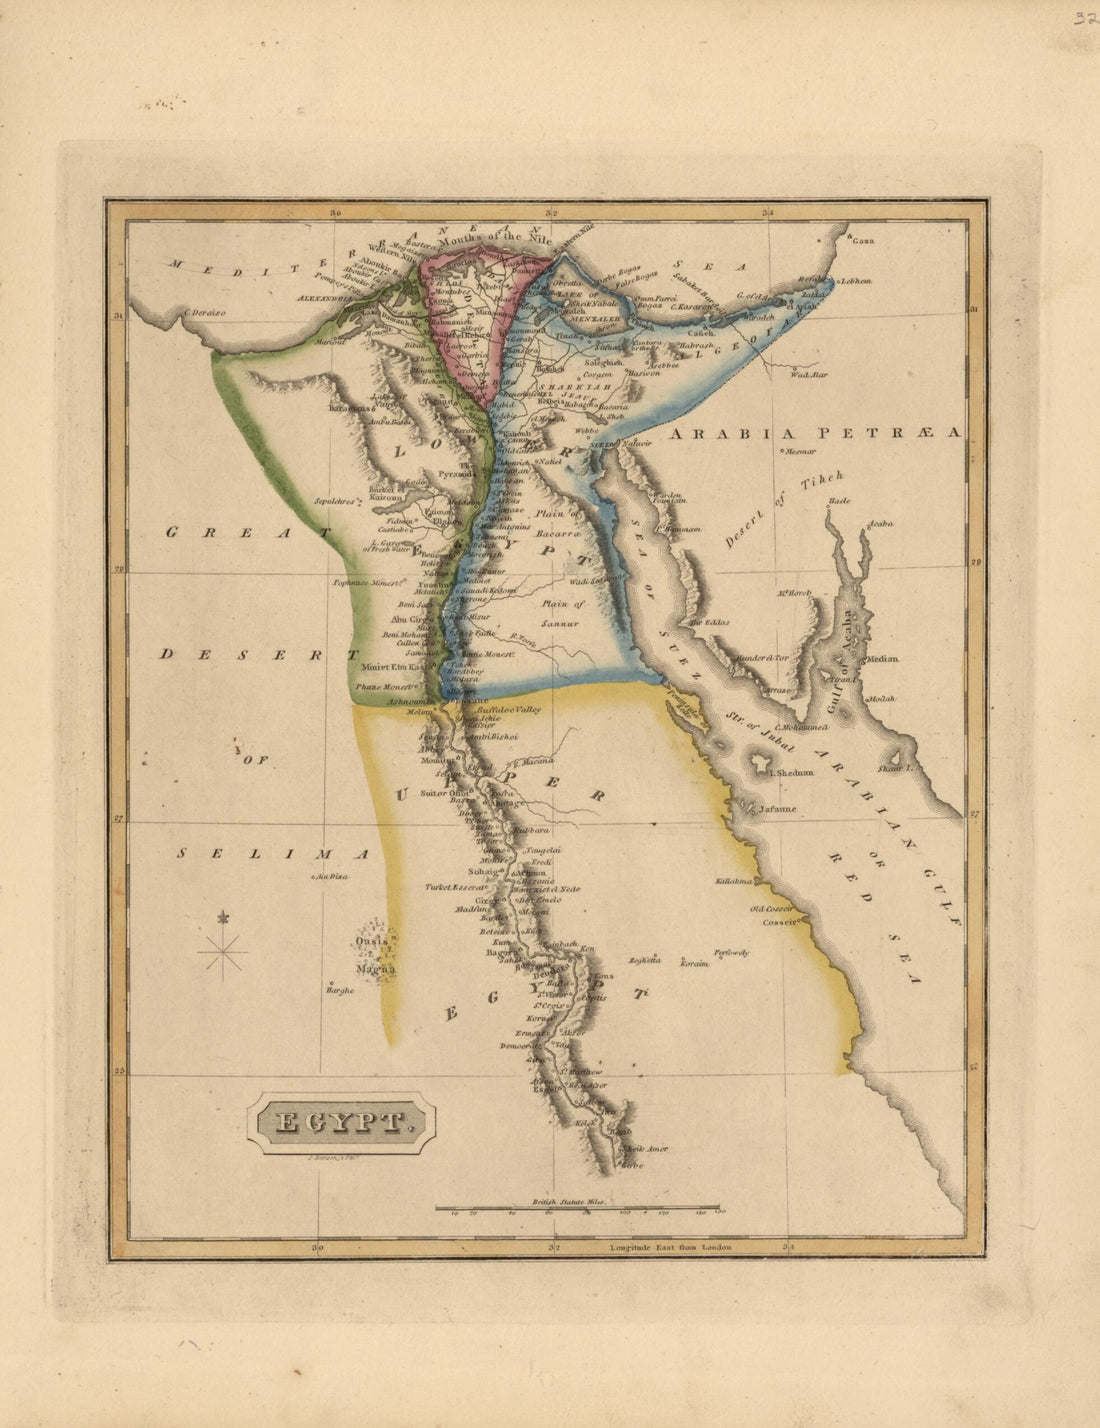 This old map of Egypt from a New and Elegant General Atlas, Containing Maps of Each of the United States  from 1817 was created by Henry Schenck Tanner in 1817